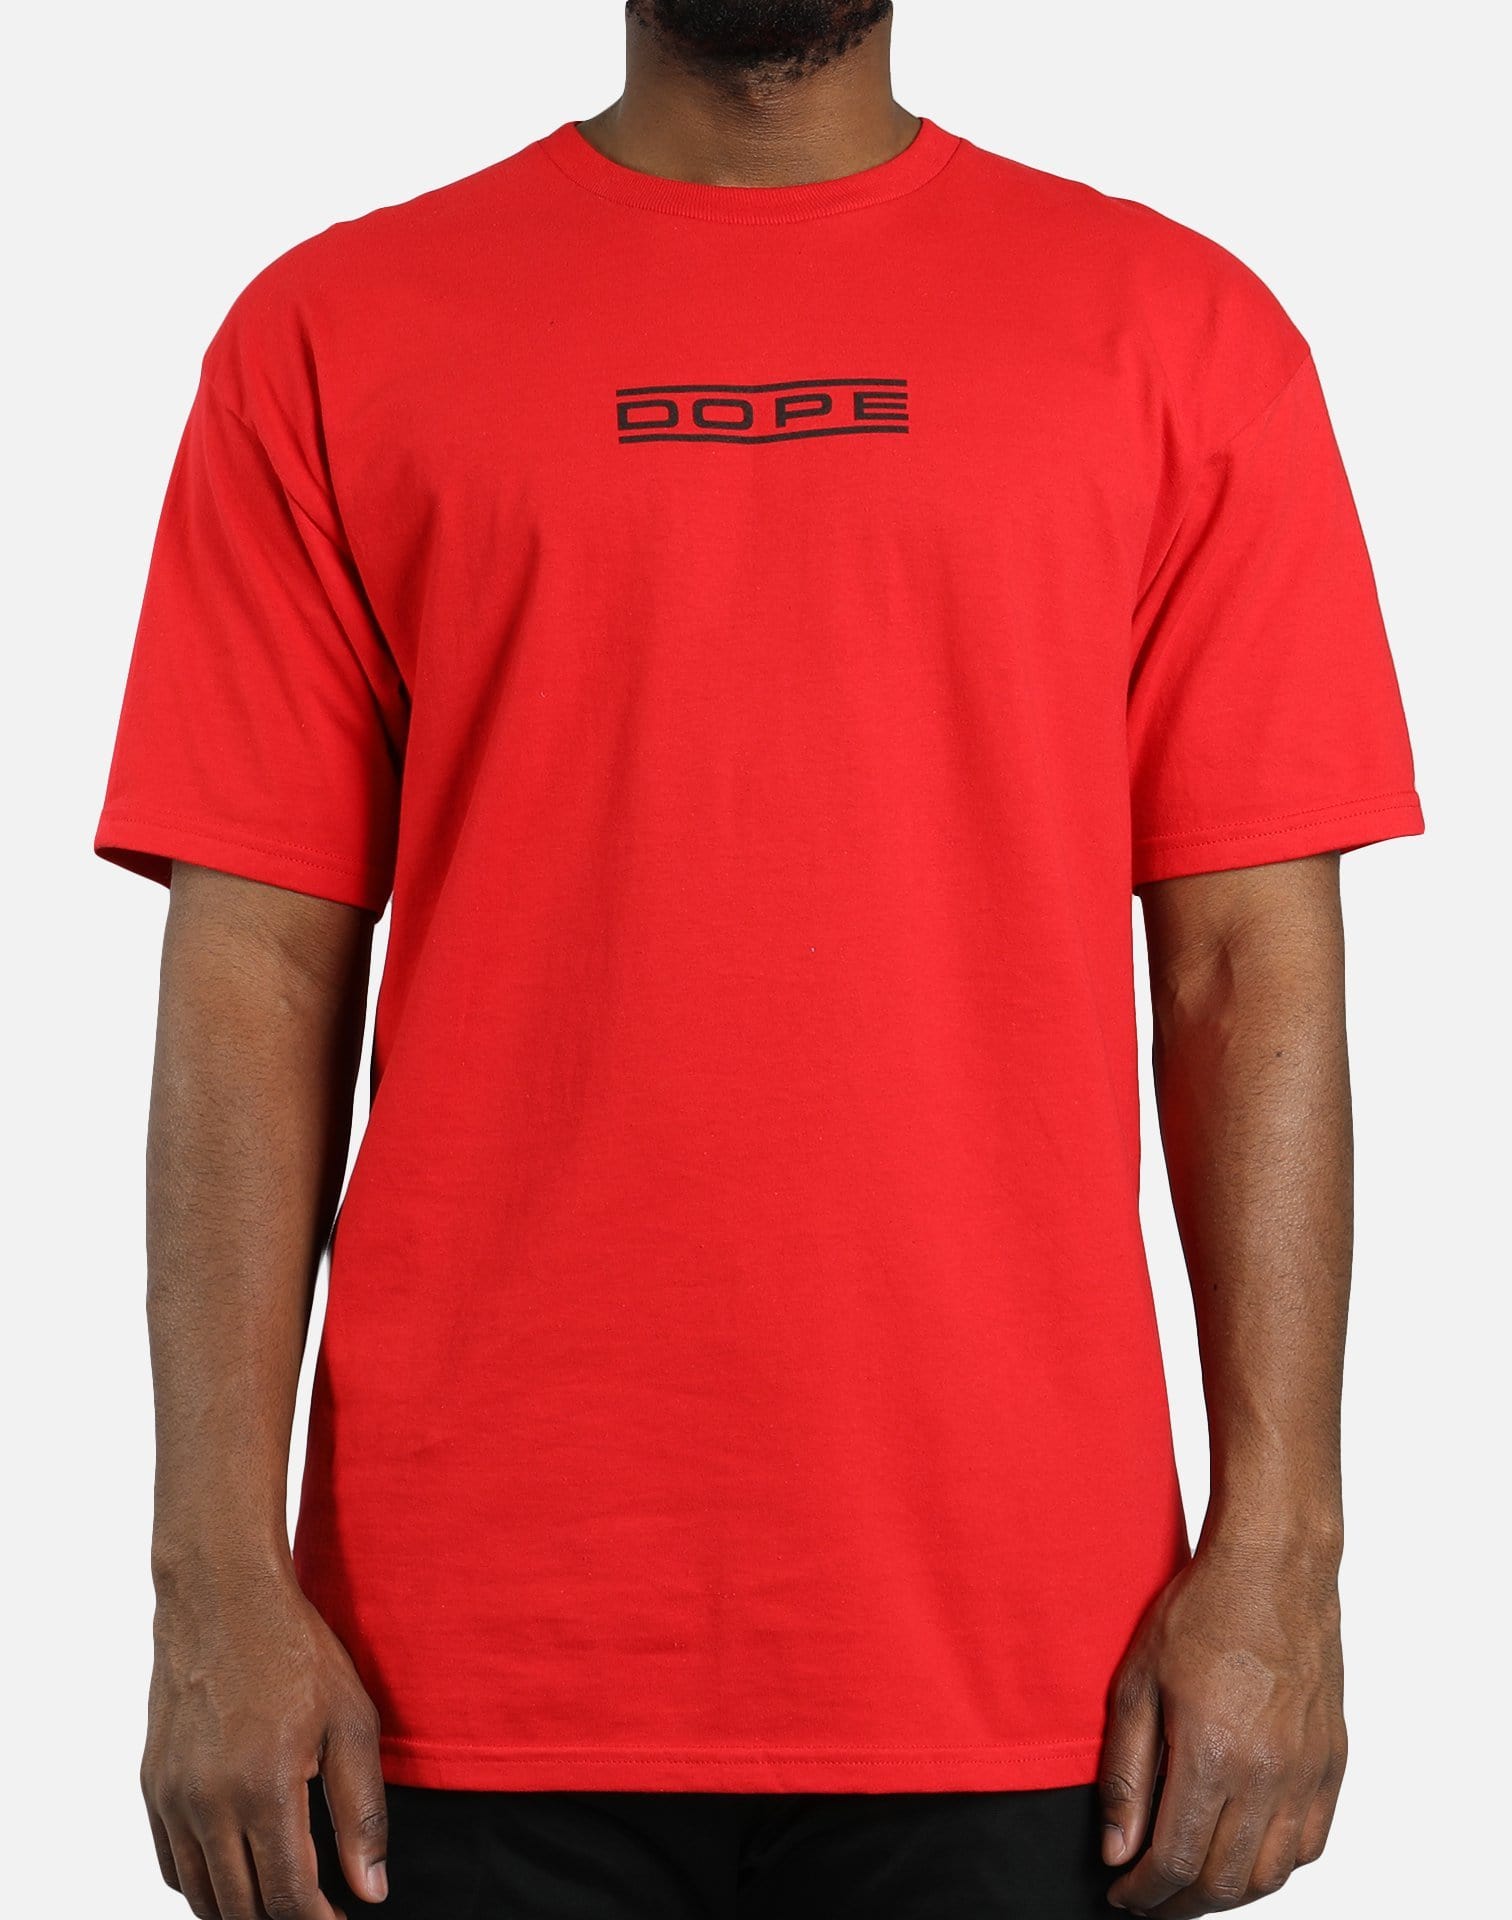 Dope Ignition Tee